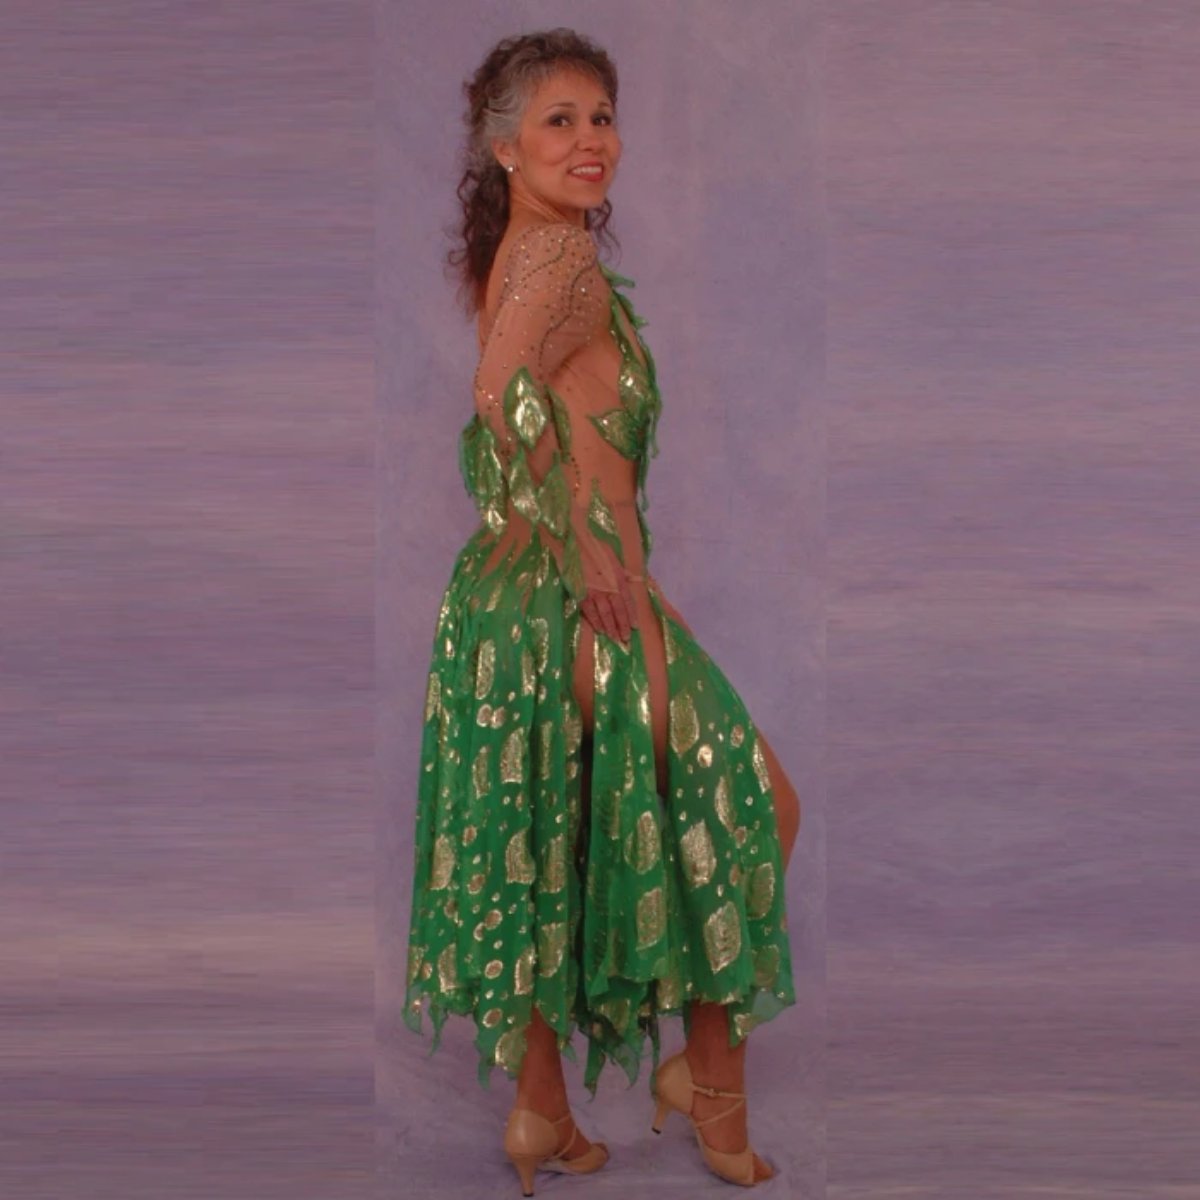 side view of Green Latin/rhythm dance dress was created on nude illusion base with green & gold metallic print chiffon… leaves hand cut & edged to embellish bodice, Swarovski rhinestones are trickled throughout in Vitrail medium(shines different shades of green & gold) 